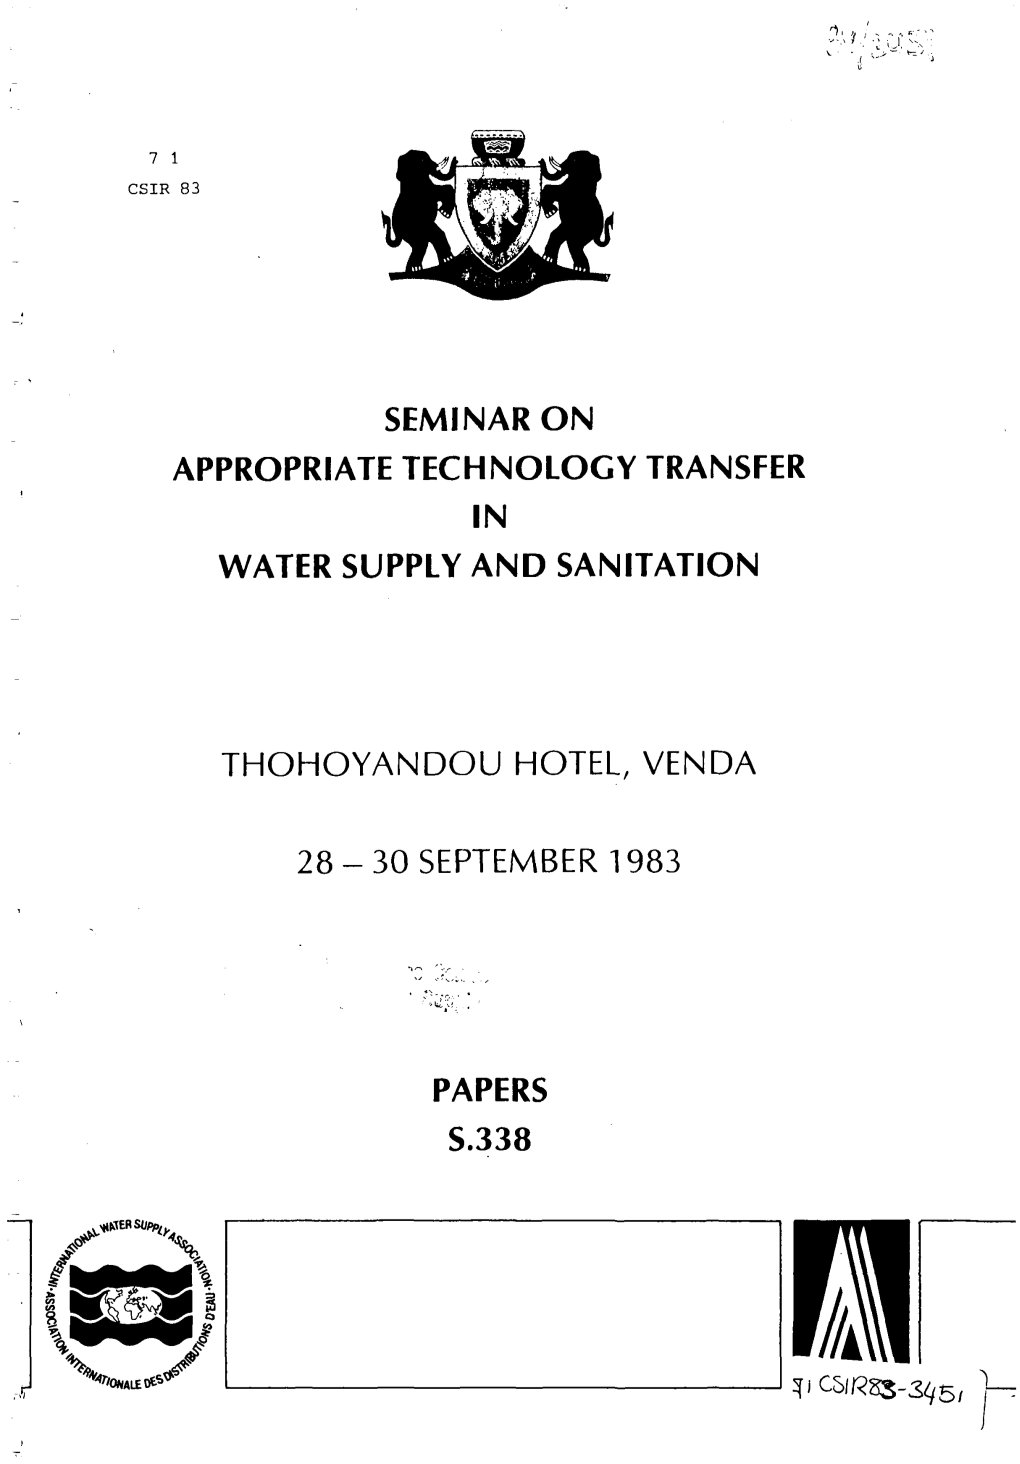 Seminar on Appropriate Technology Transfer in Water Supply and Sanitation